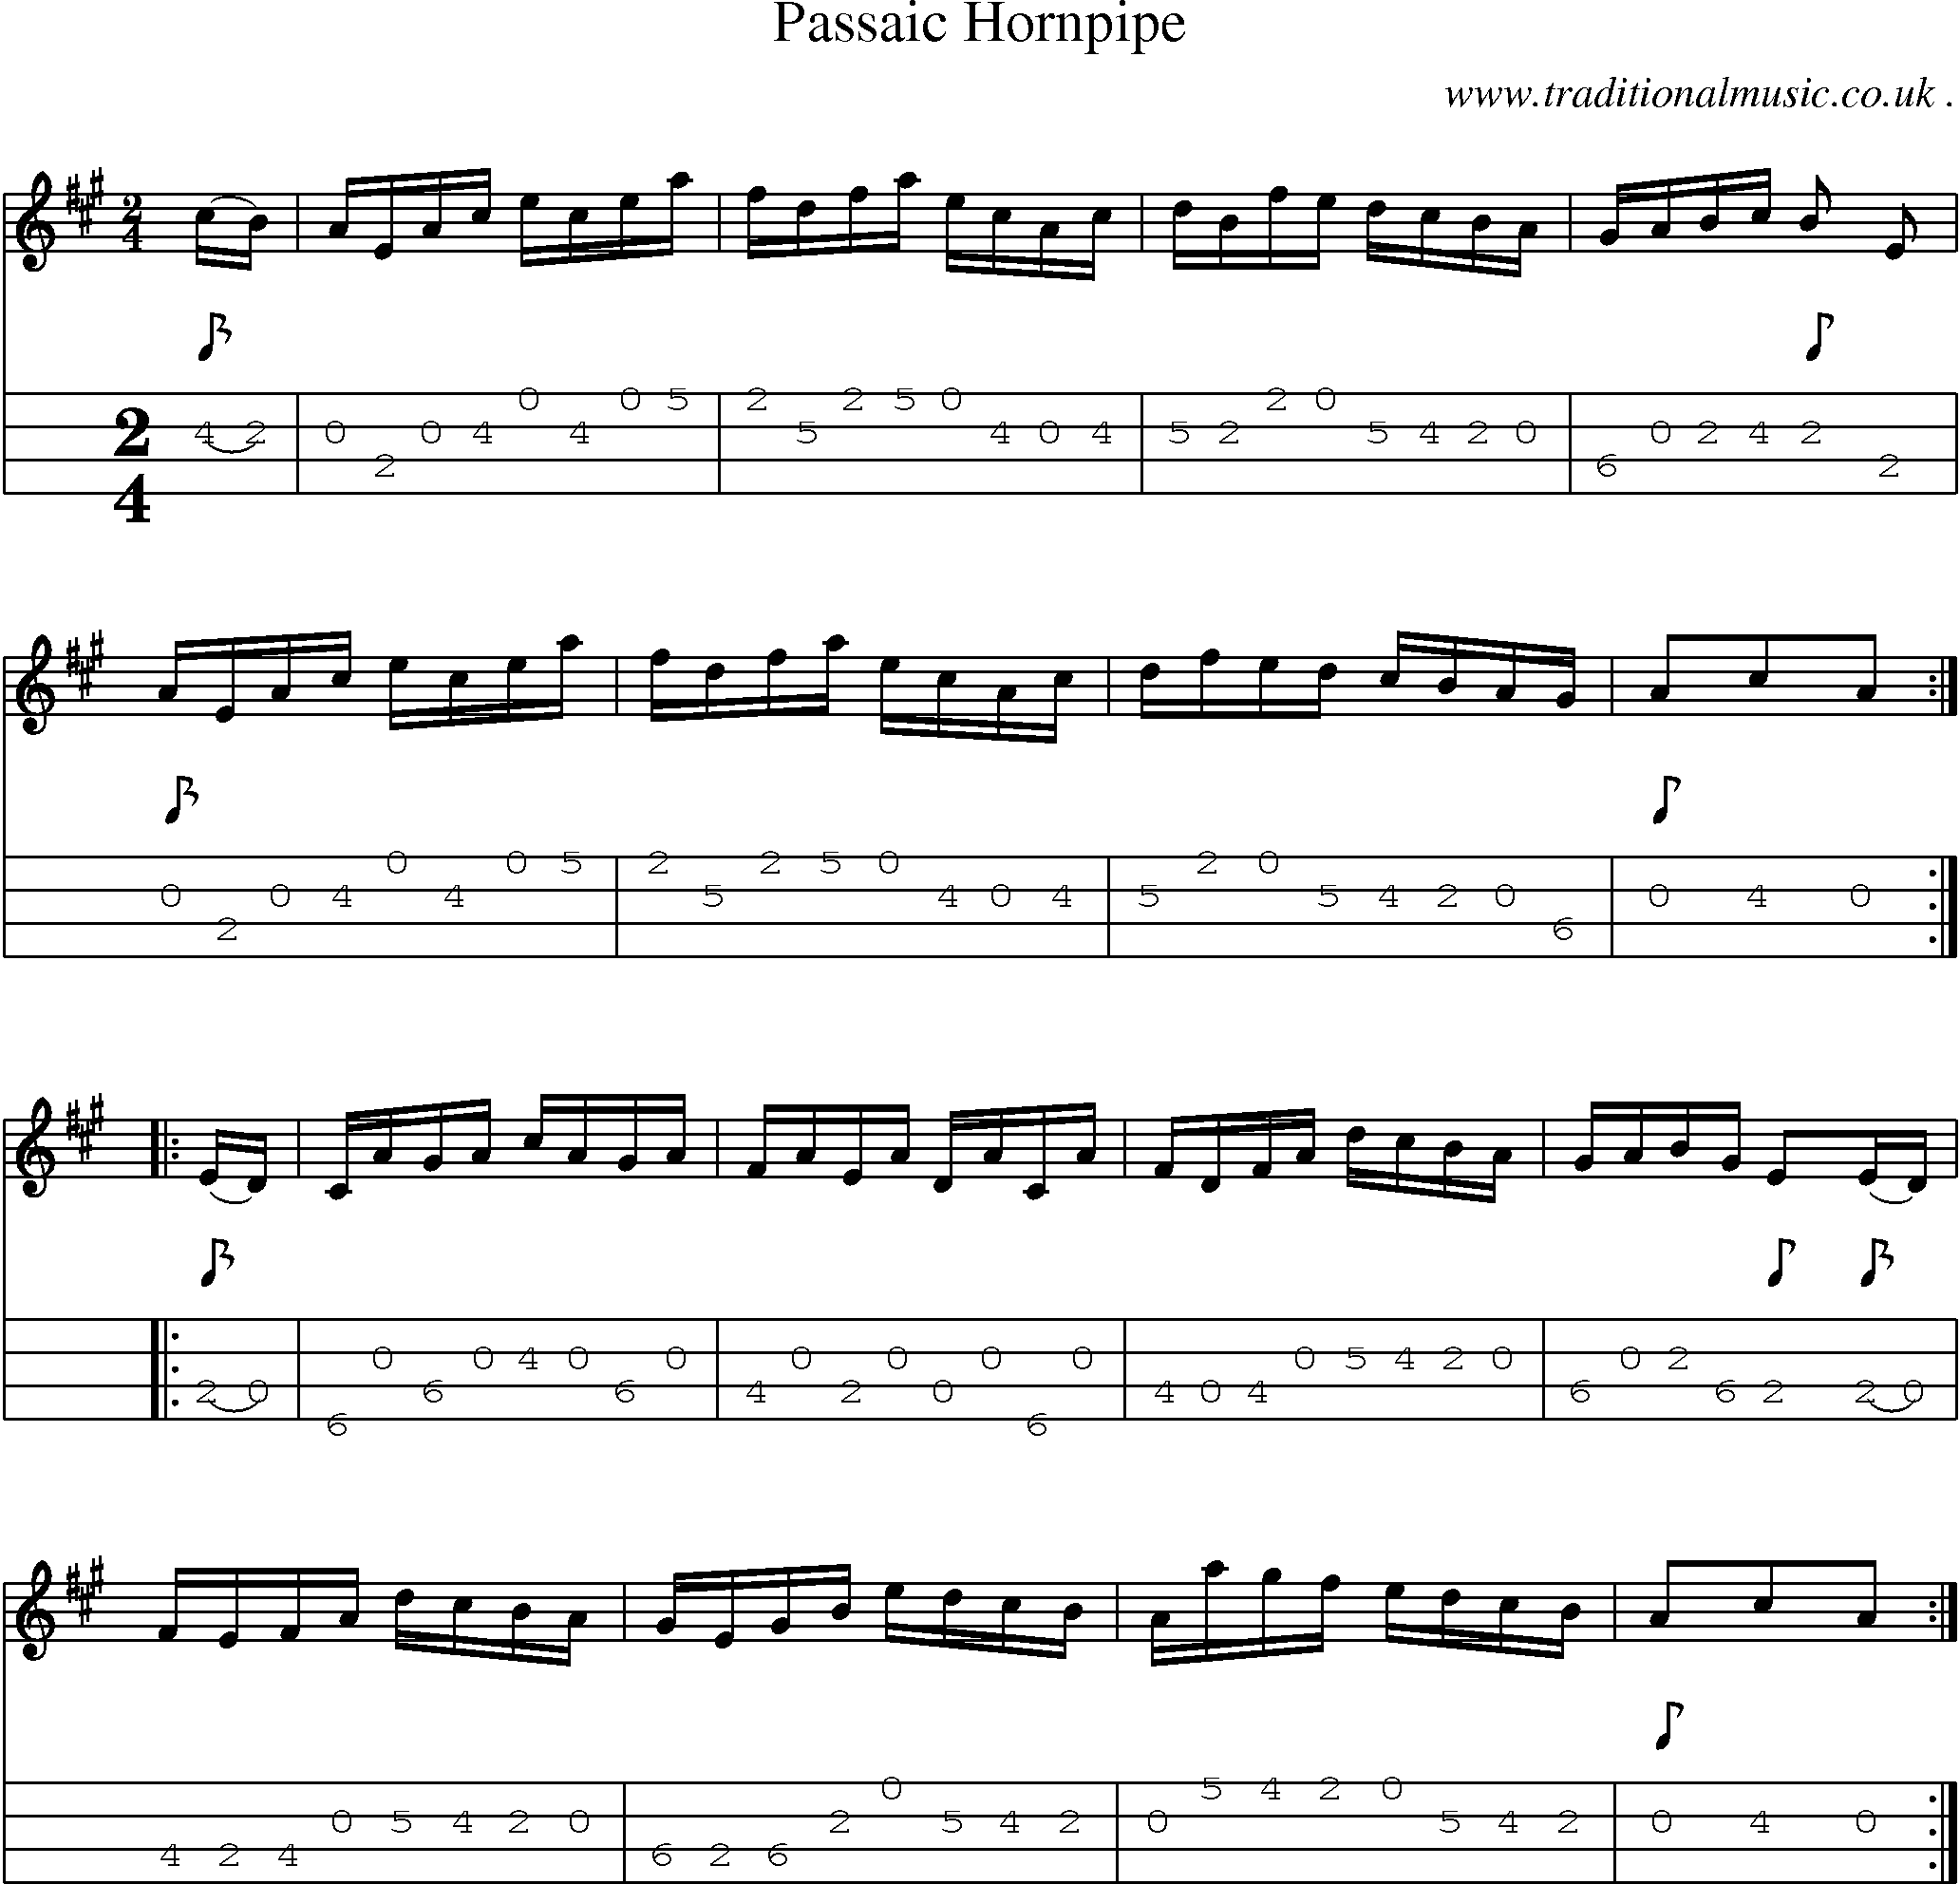 Sheet-Music and Mandolin Tabs for Passaic Hornpipe